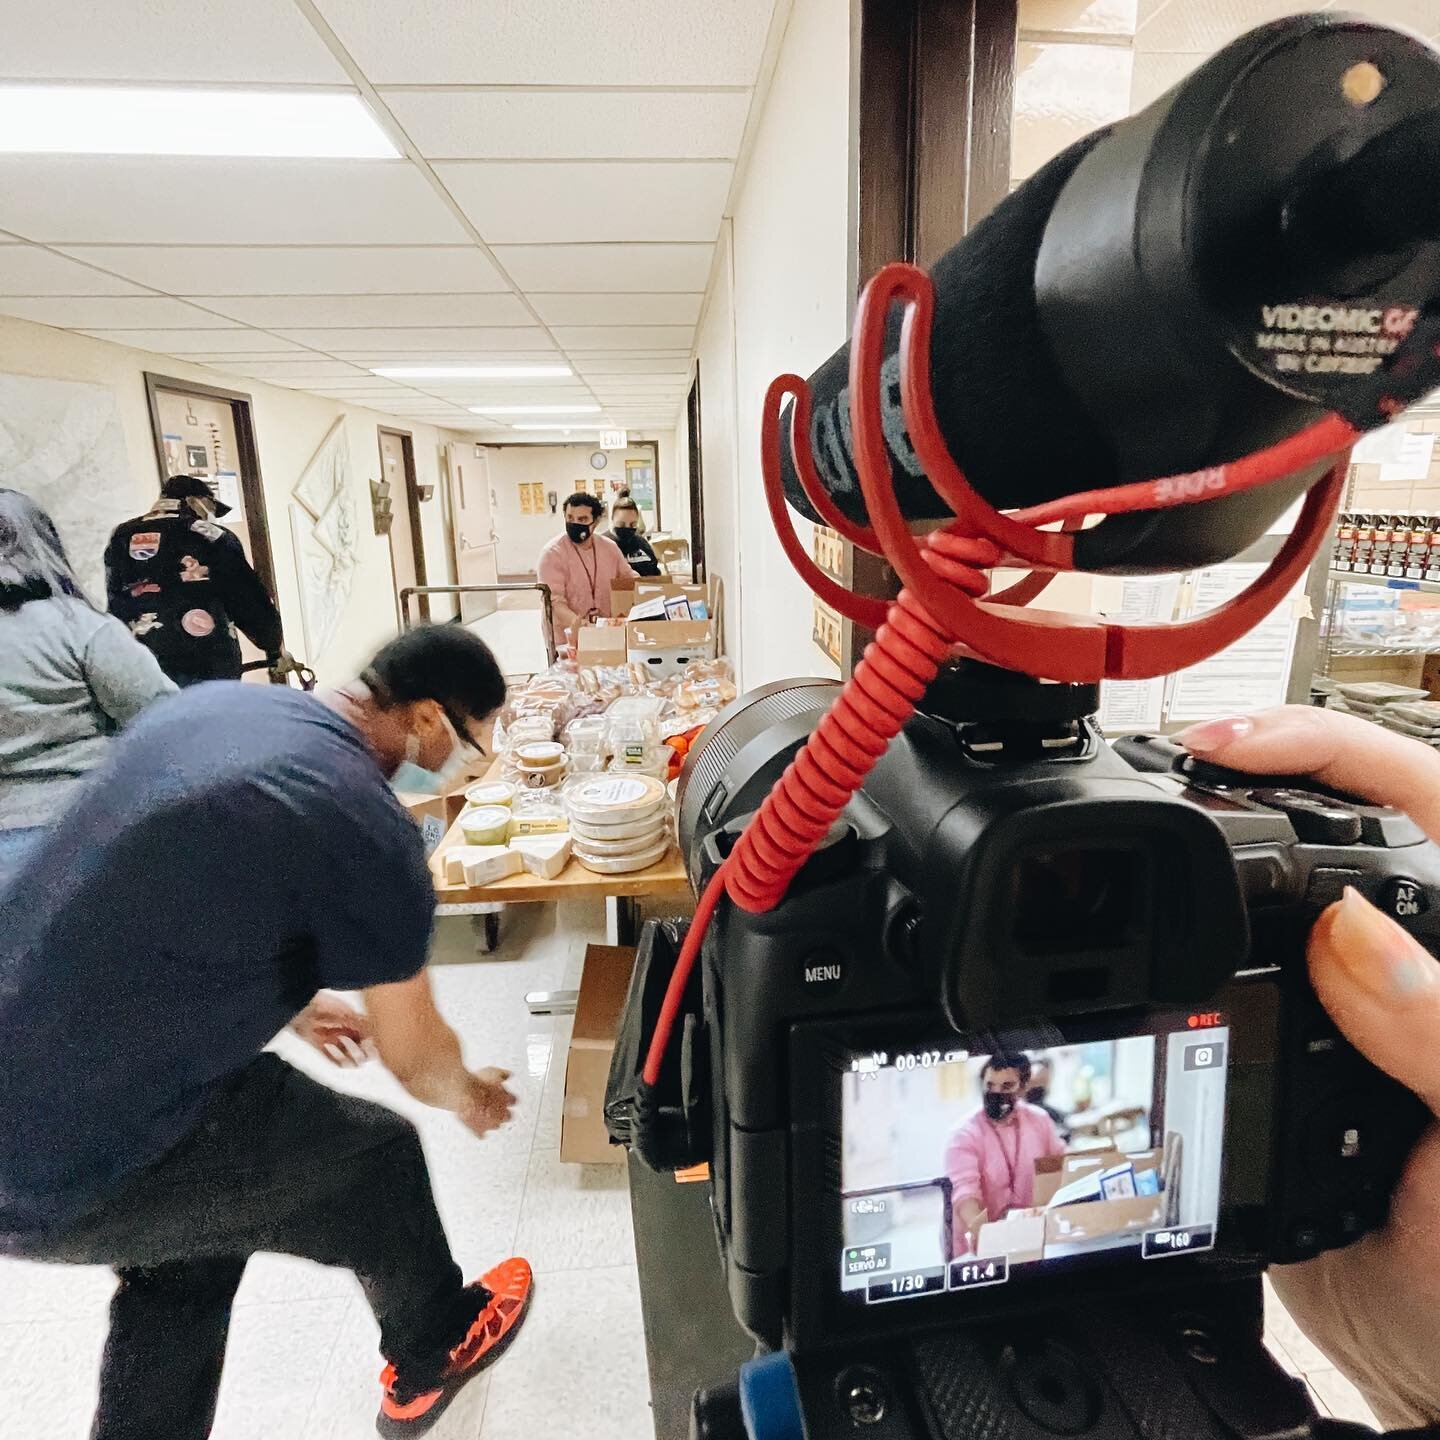 Filming is almost complete for our next project with @assochouse and we&rsquo;ve had a blast with the community while capturing the spirit of this important place in Chicago&rsquo;s Humboldt Park. Excited to share at their upcoming event in June. 

T